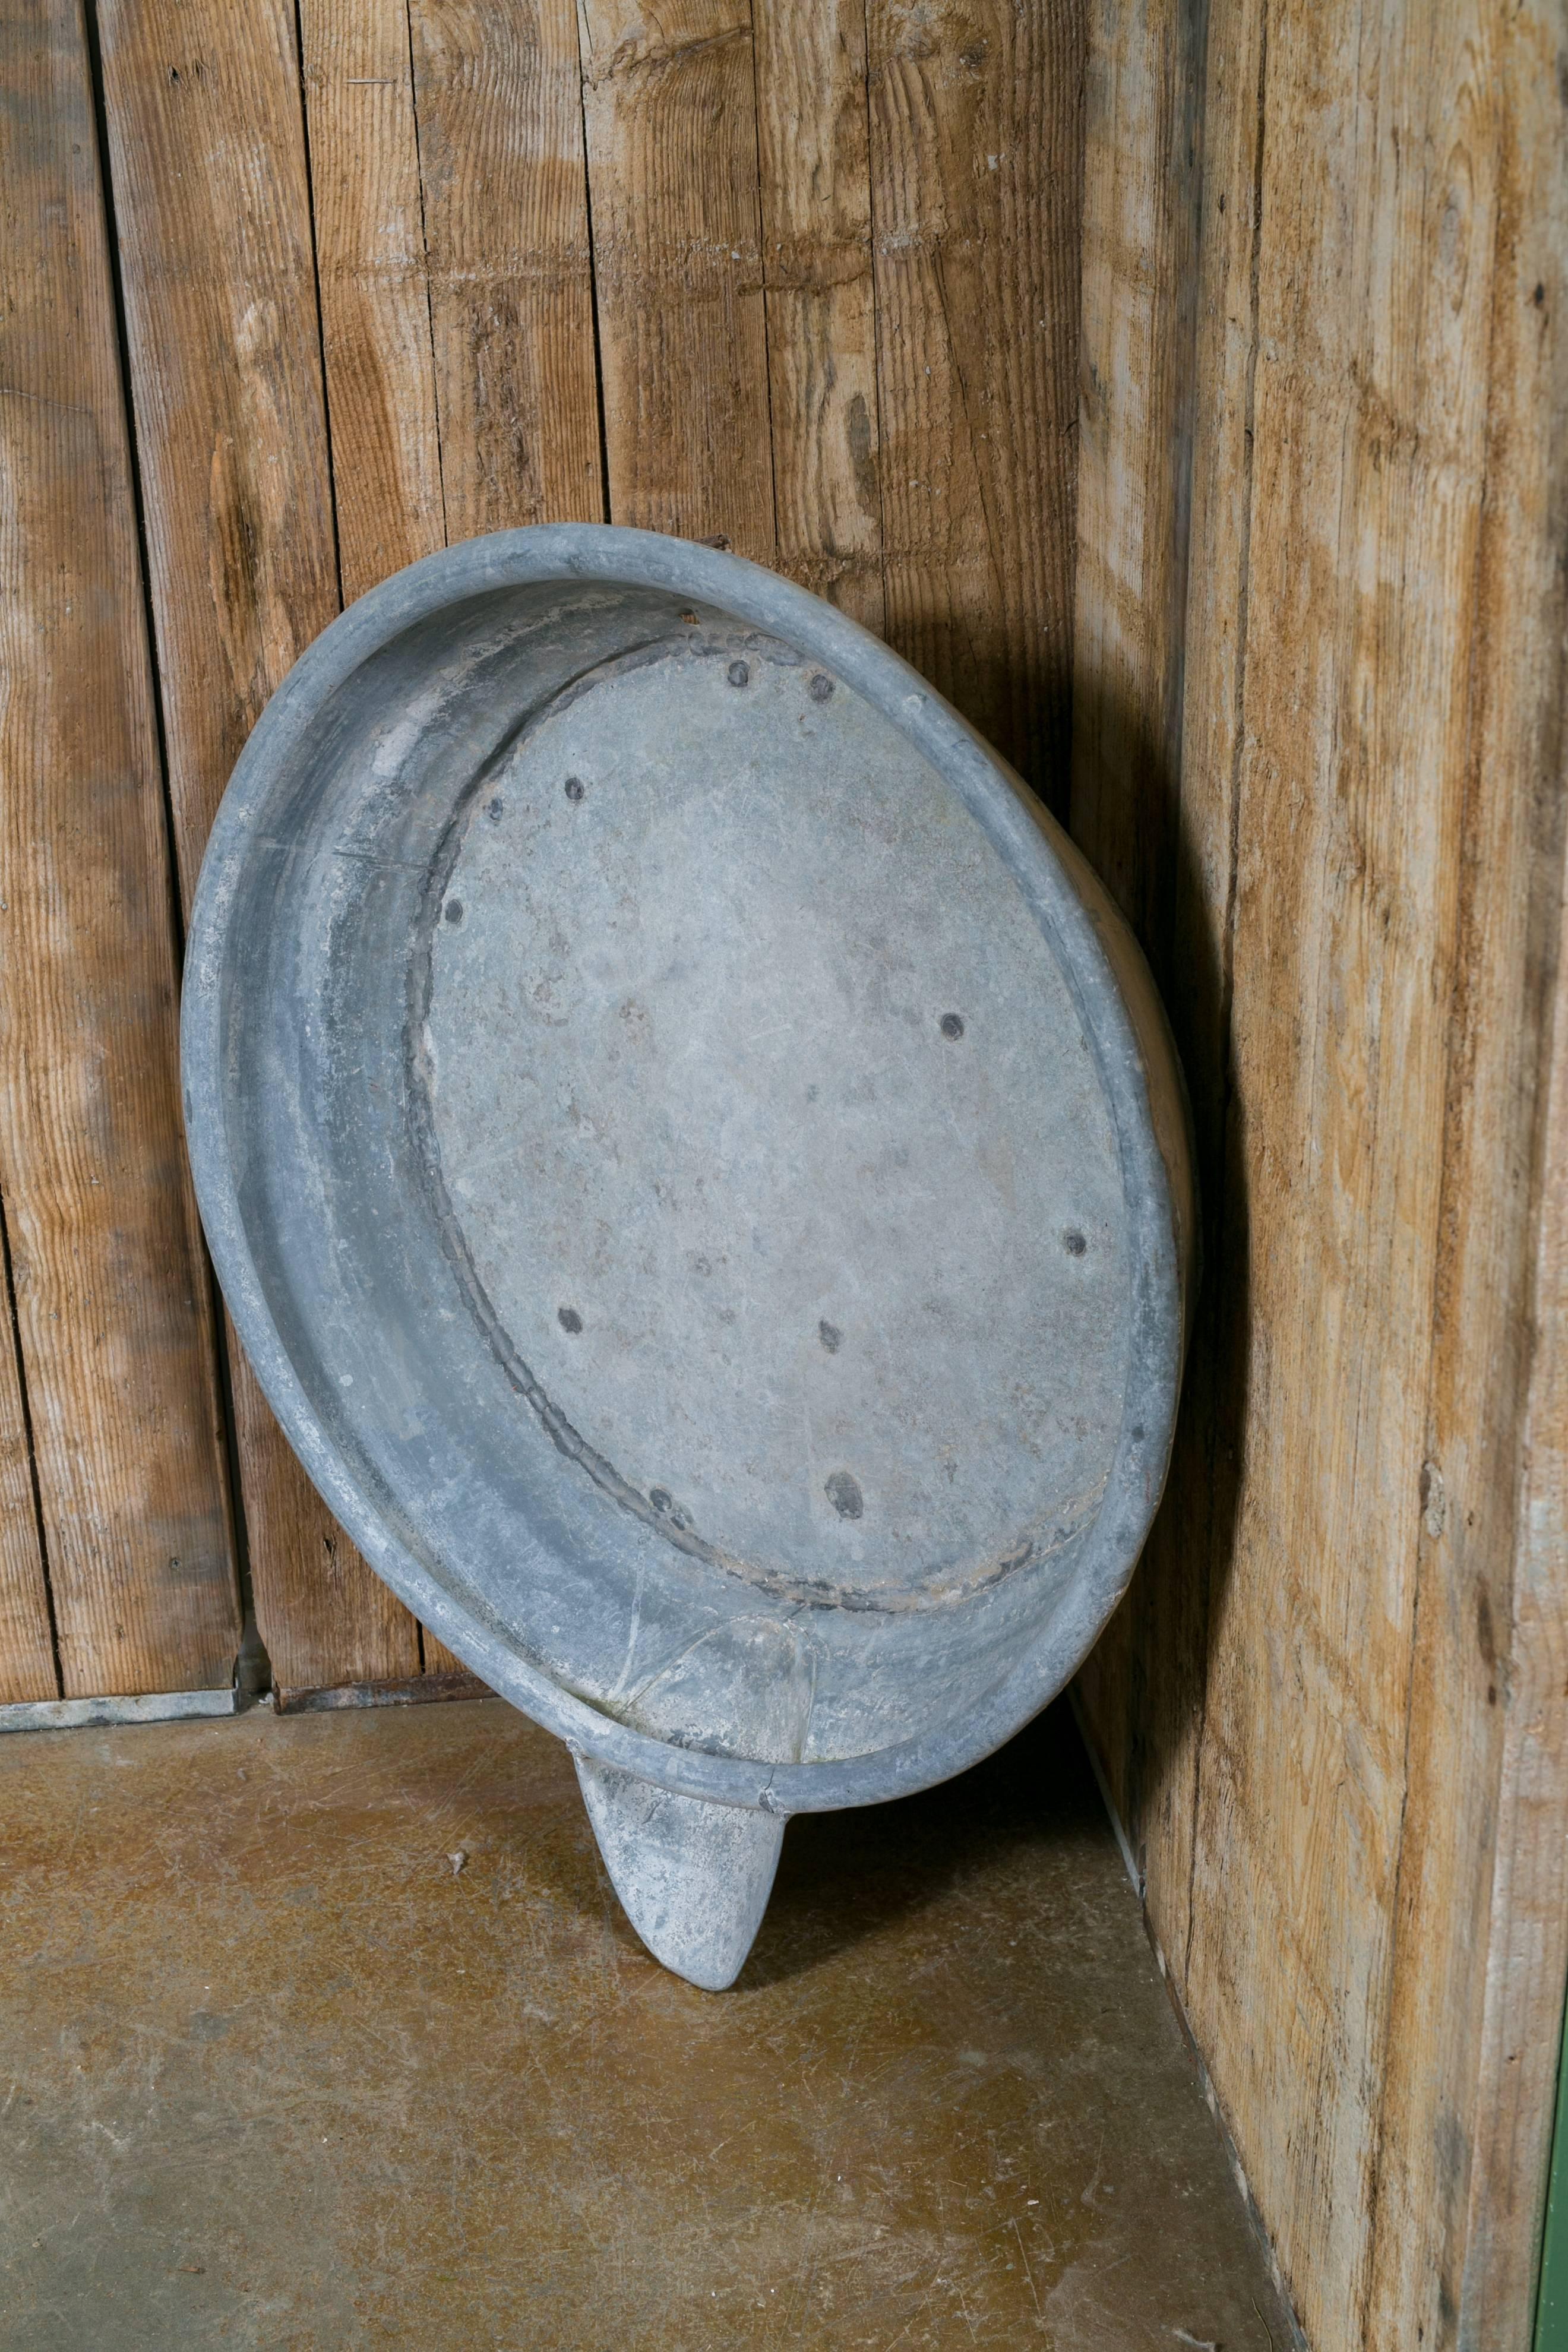 Vintage large Belgian Industrial saucer with spout. Handcrafted zinc construction with a hook on the back for hanging. We believe they were some sort of cream or milk separator. Makes a great wall decoration.